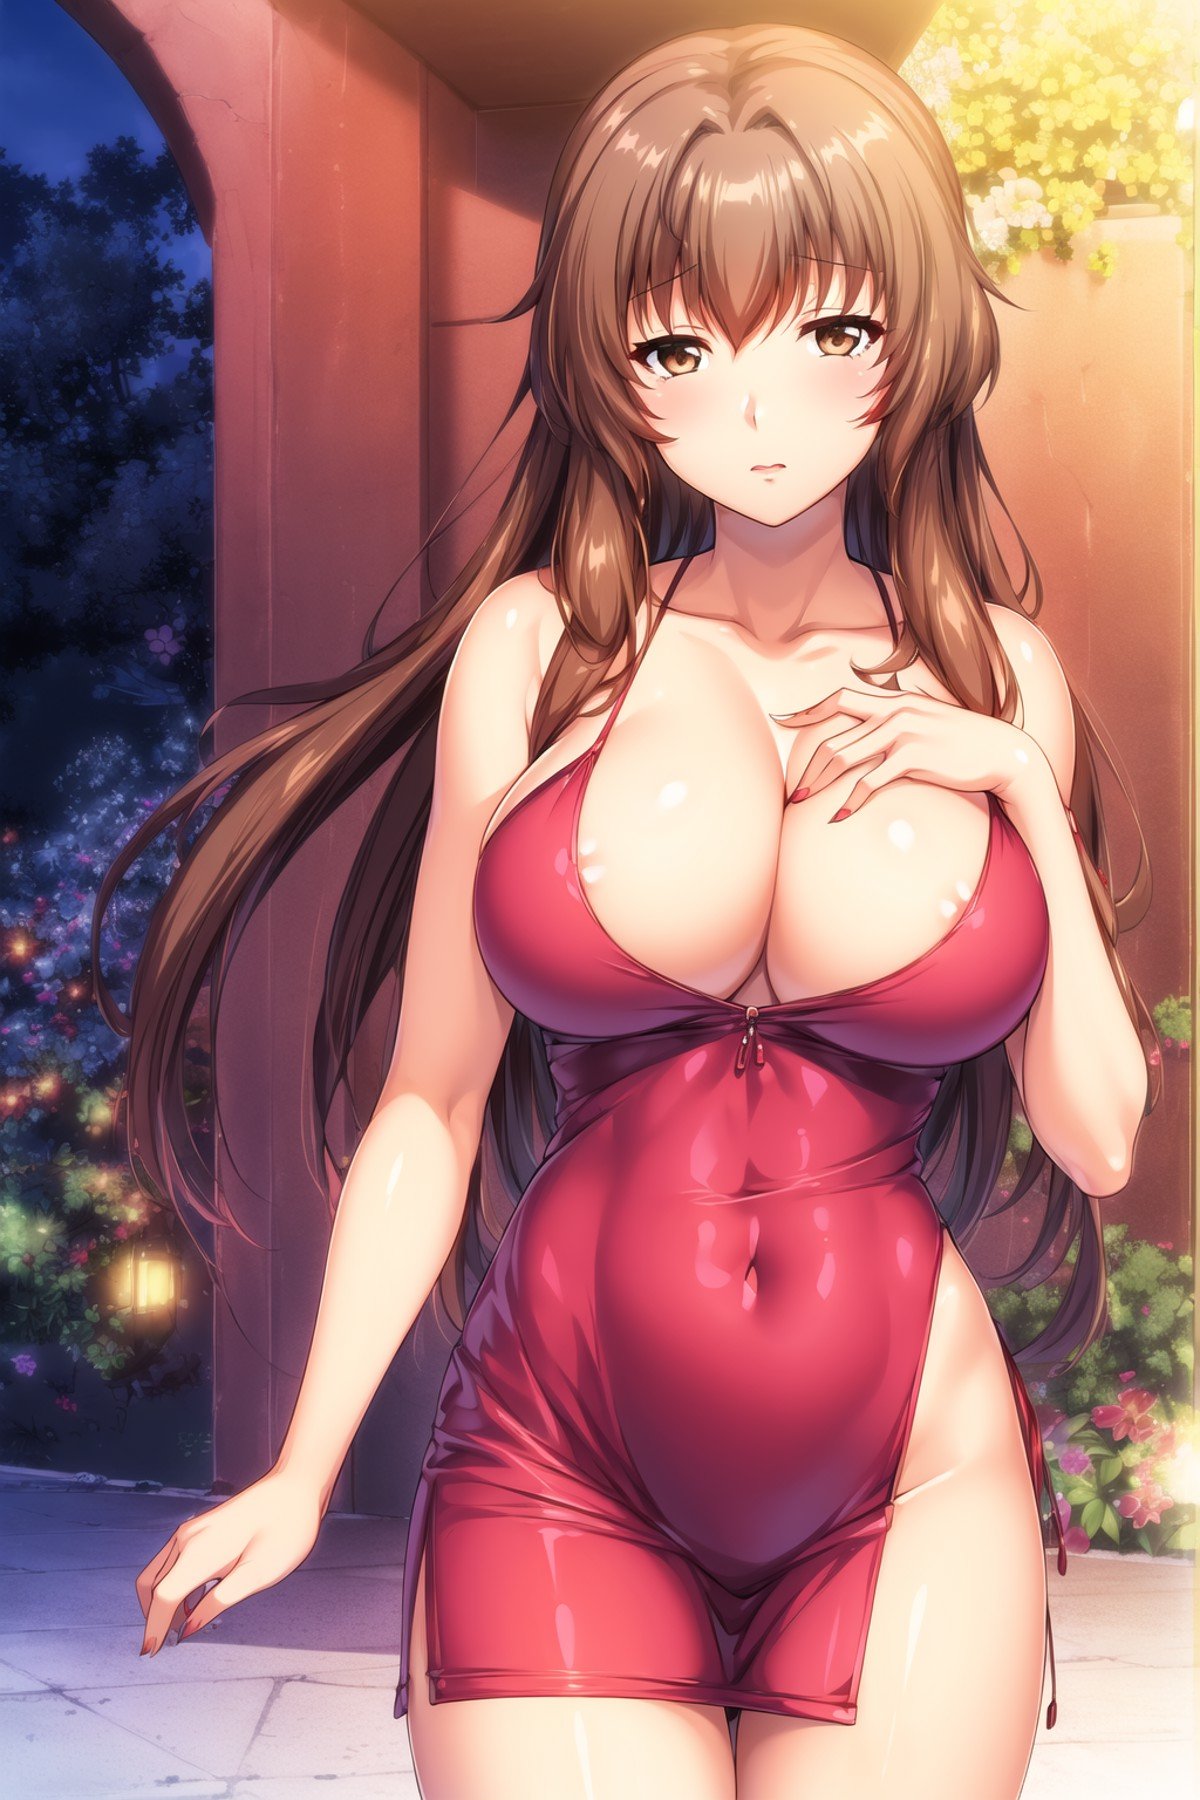 (Night:1.7), Cyberpunk_CityView, Before Window,(Standing:1.7) at attention,Red_dress,<lora:Sayoko_Asatsuyu_Tsumamigui3-KK77-V1:0.7>,bare legs,brown_hair,brown_eyes,Bangs,1 girl, 20yo,mature female,Beautiful Finger,Beautiful long legs,Beautiful body,Beautiful Nose,Beautiful character design, perfect eyes, perfect face,looking at viewer, (innocent_big_eyes:1.0),(expressionless:1.3),NSFW,official art,extremely detailed CG unity 8k wallpaper, perfect lighting,Colorful, Bright_Front_face_Lighting,(masterpiece:1.0),(best_quality:1.0), ultra high res,4K,ultra-detailed,photography, 8K, HDR, highres, absurdres:1.2, Kodak portra 400, film grain, blurry background, bokeh:1.2, lens flare, (vibrant_color:1.2)(Beautiful,large_Breasts:1.4), (beautiful_face:1.5),(narrow_waist), 